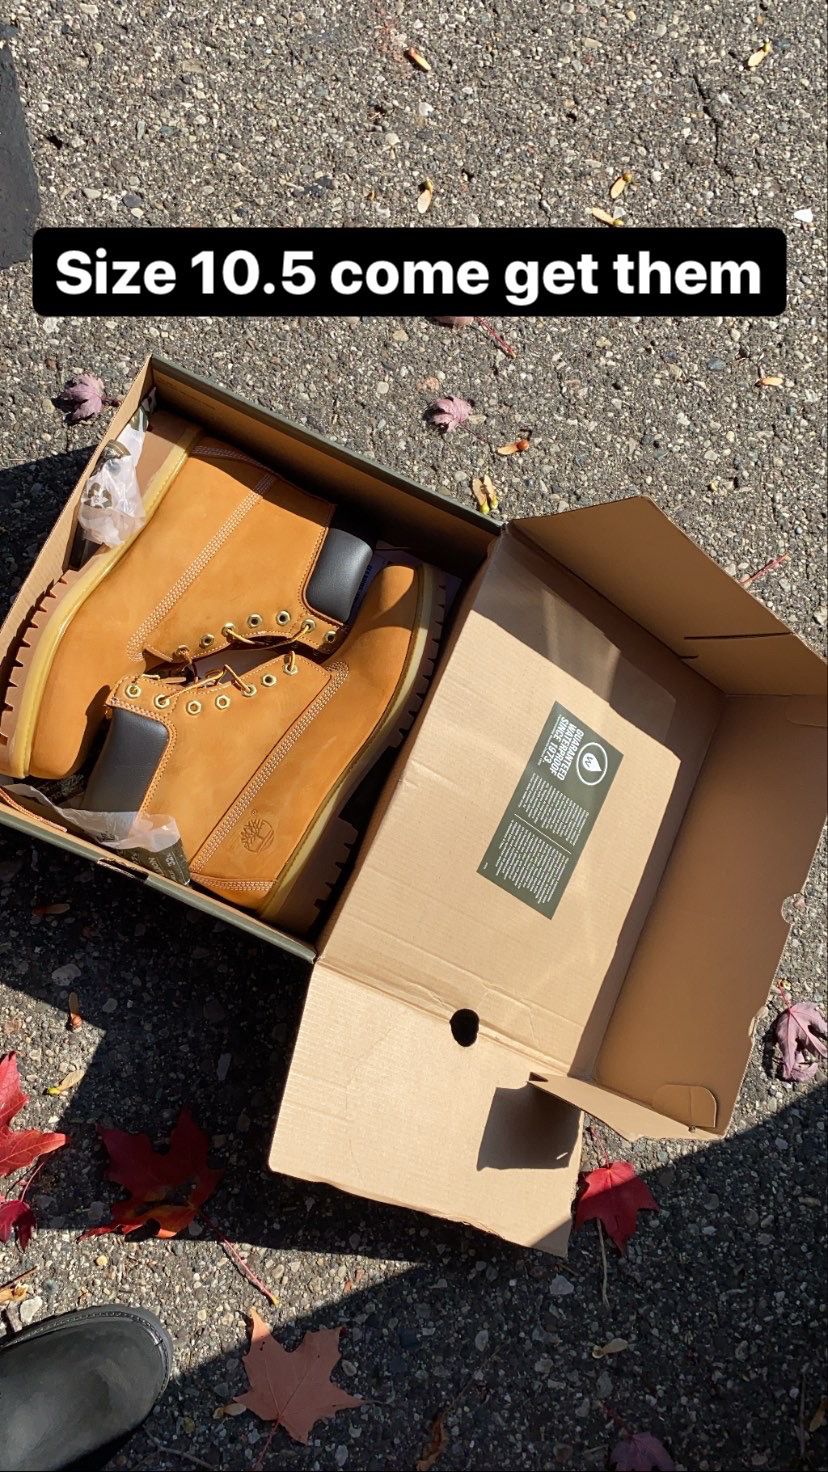 Men’s timberland boots size 10.5